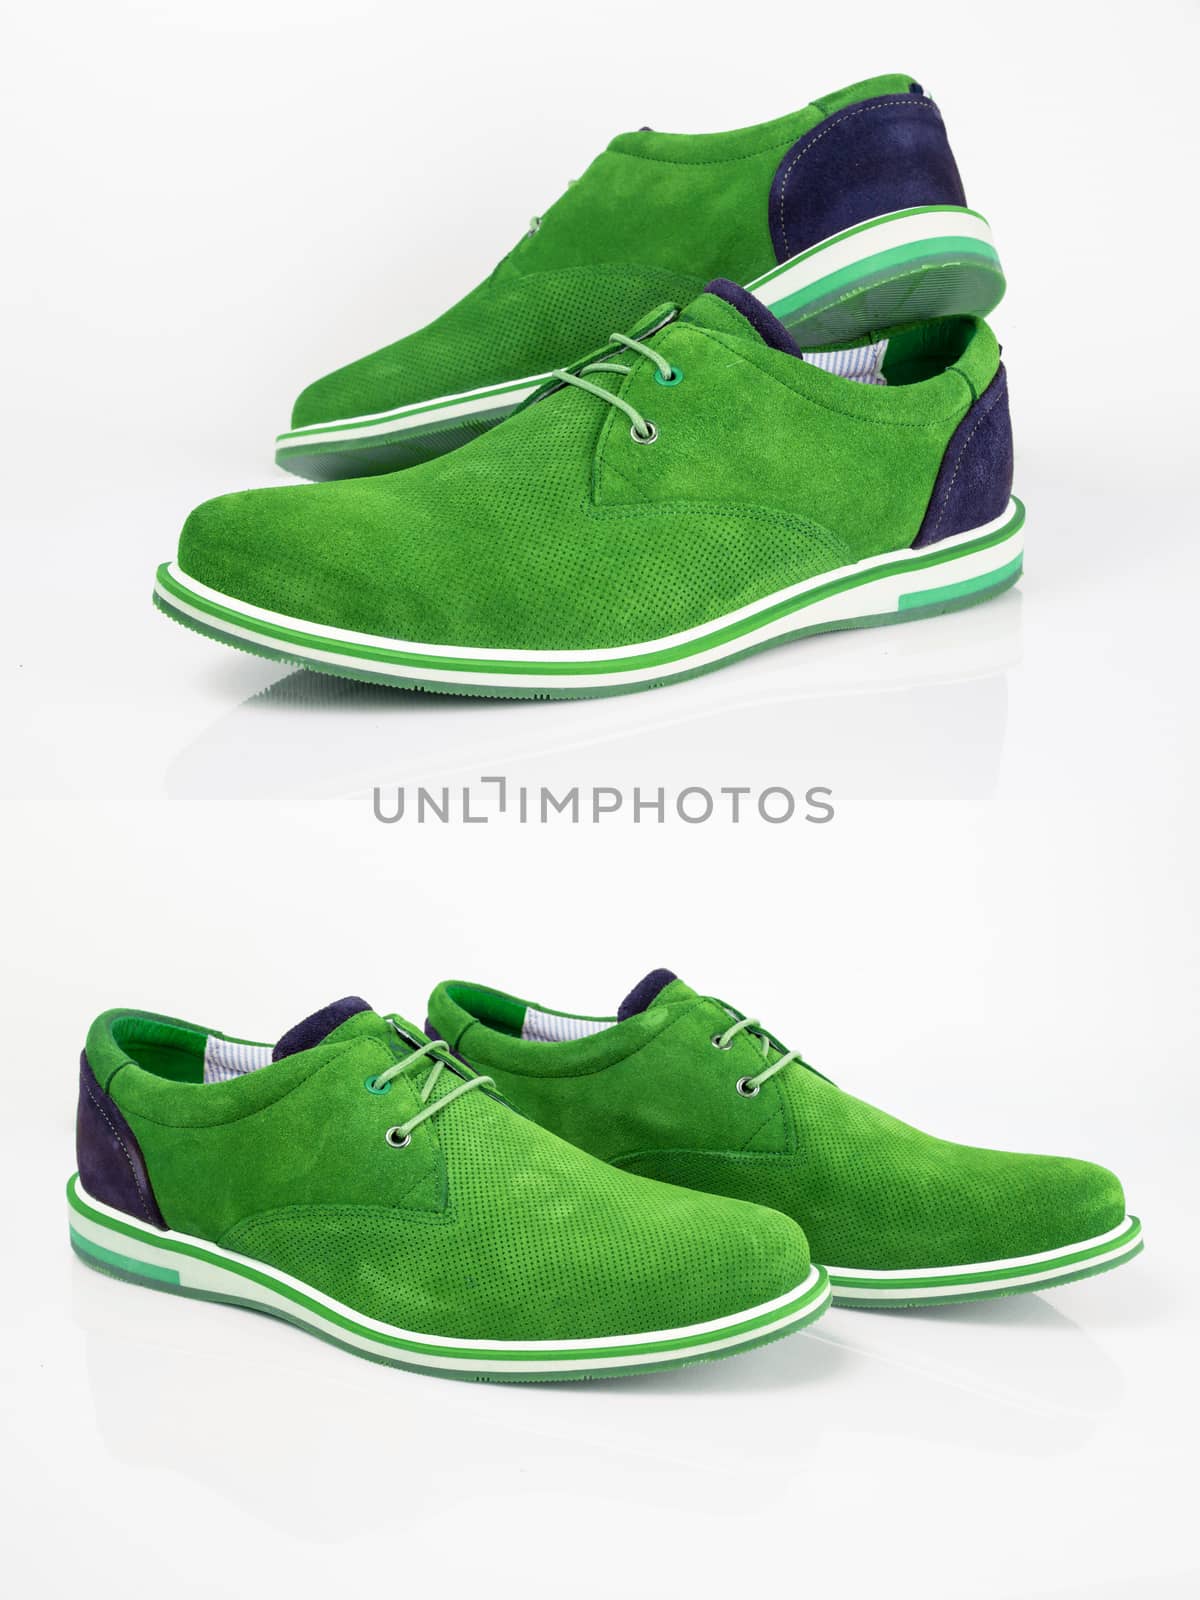 Male green leather elegant shoes on white background, isolated product.